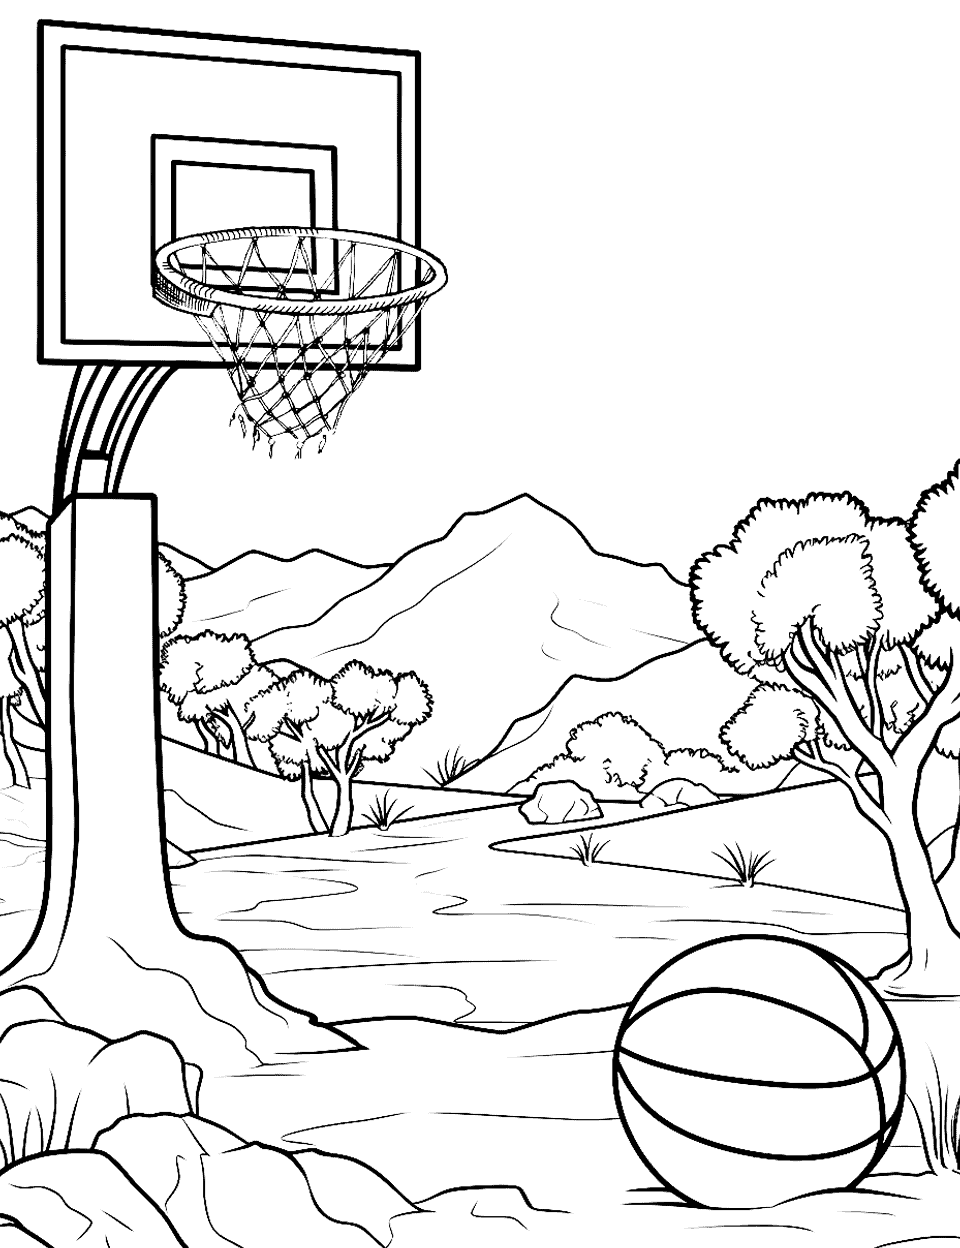 Desert Oasis Basketball Coloring Page - A scene of a basketball hoop set up near an oasis in the desert.